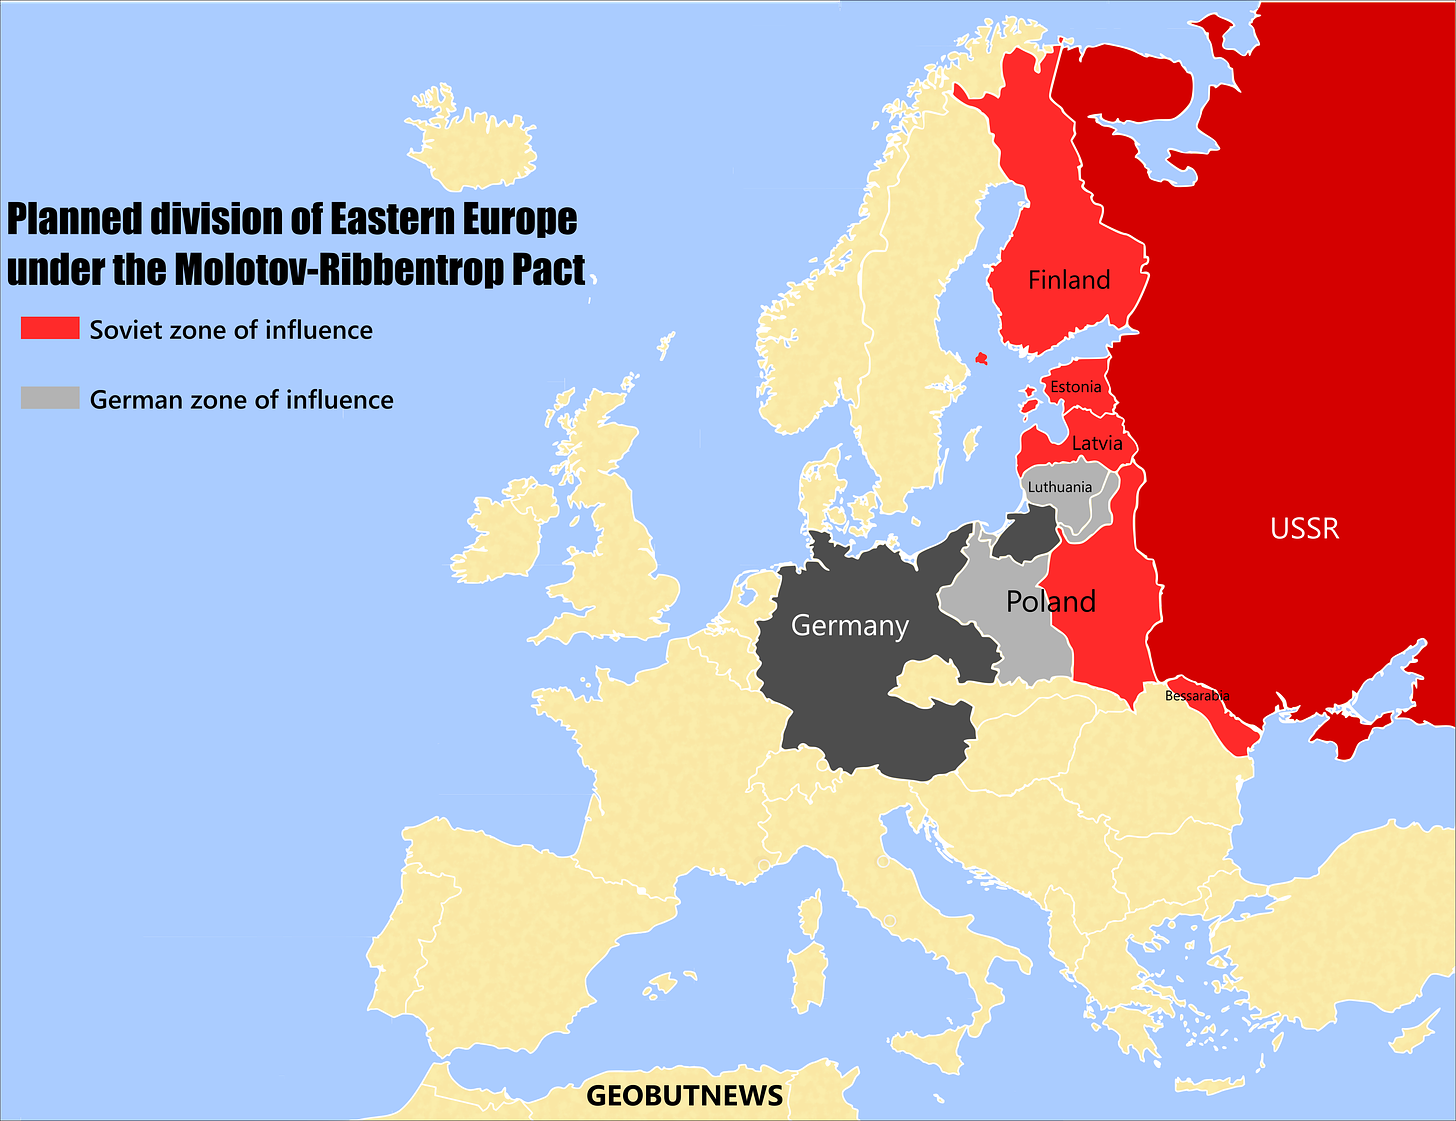 Planned division of Eastern Europe under the Molotov-Ribbentrop Pact :  r/MapPorn